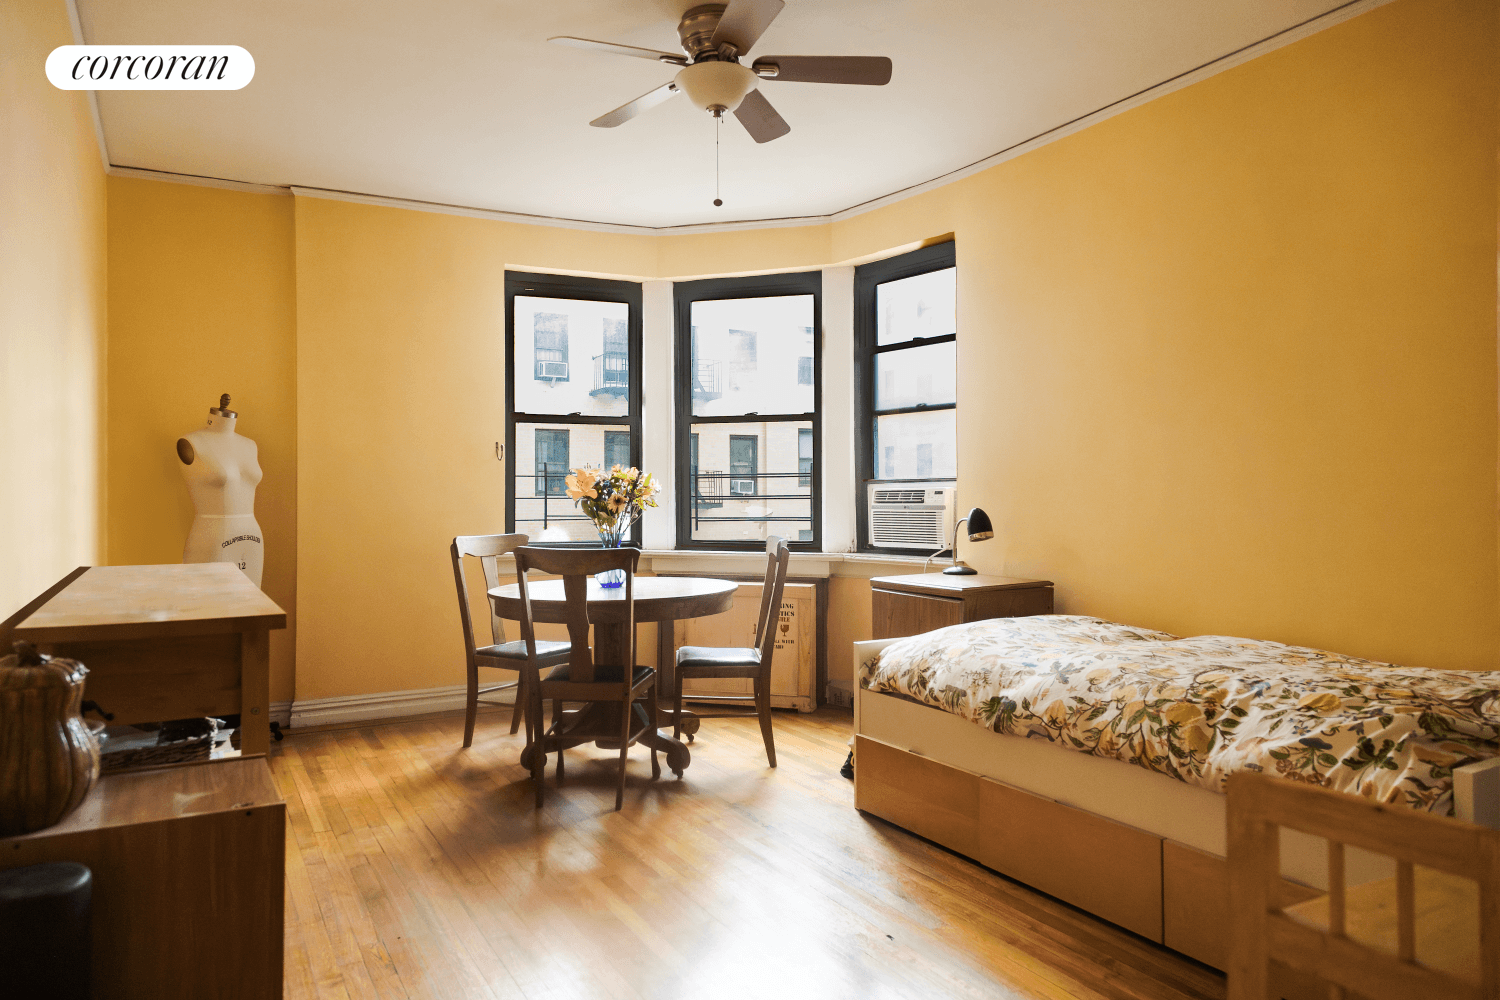 Classic charm and peace with a dash of convenience ; that's what you will find in this spacious Hudson Heights apartment within a stately, historic Art Deco coop building.